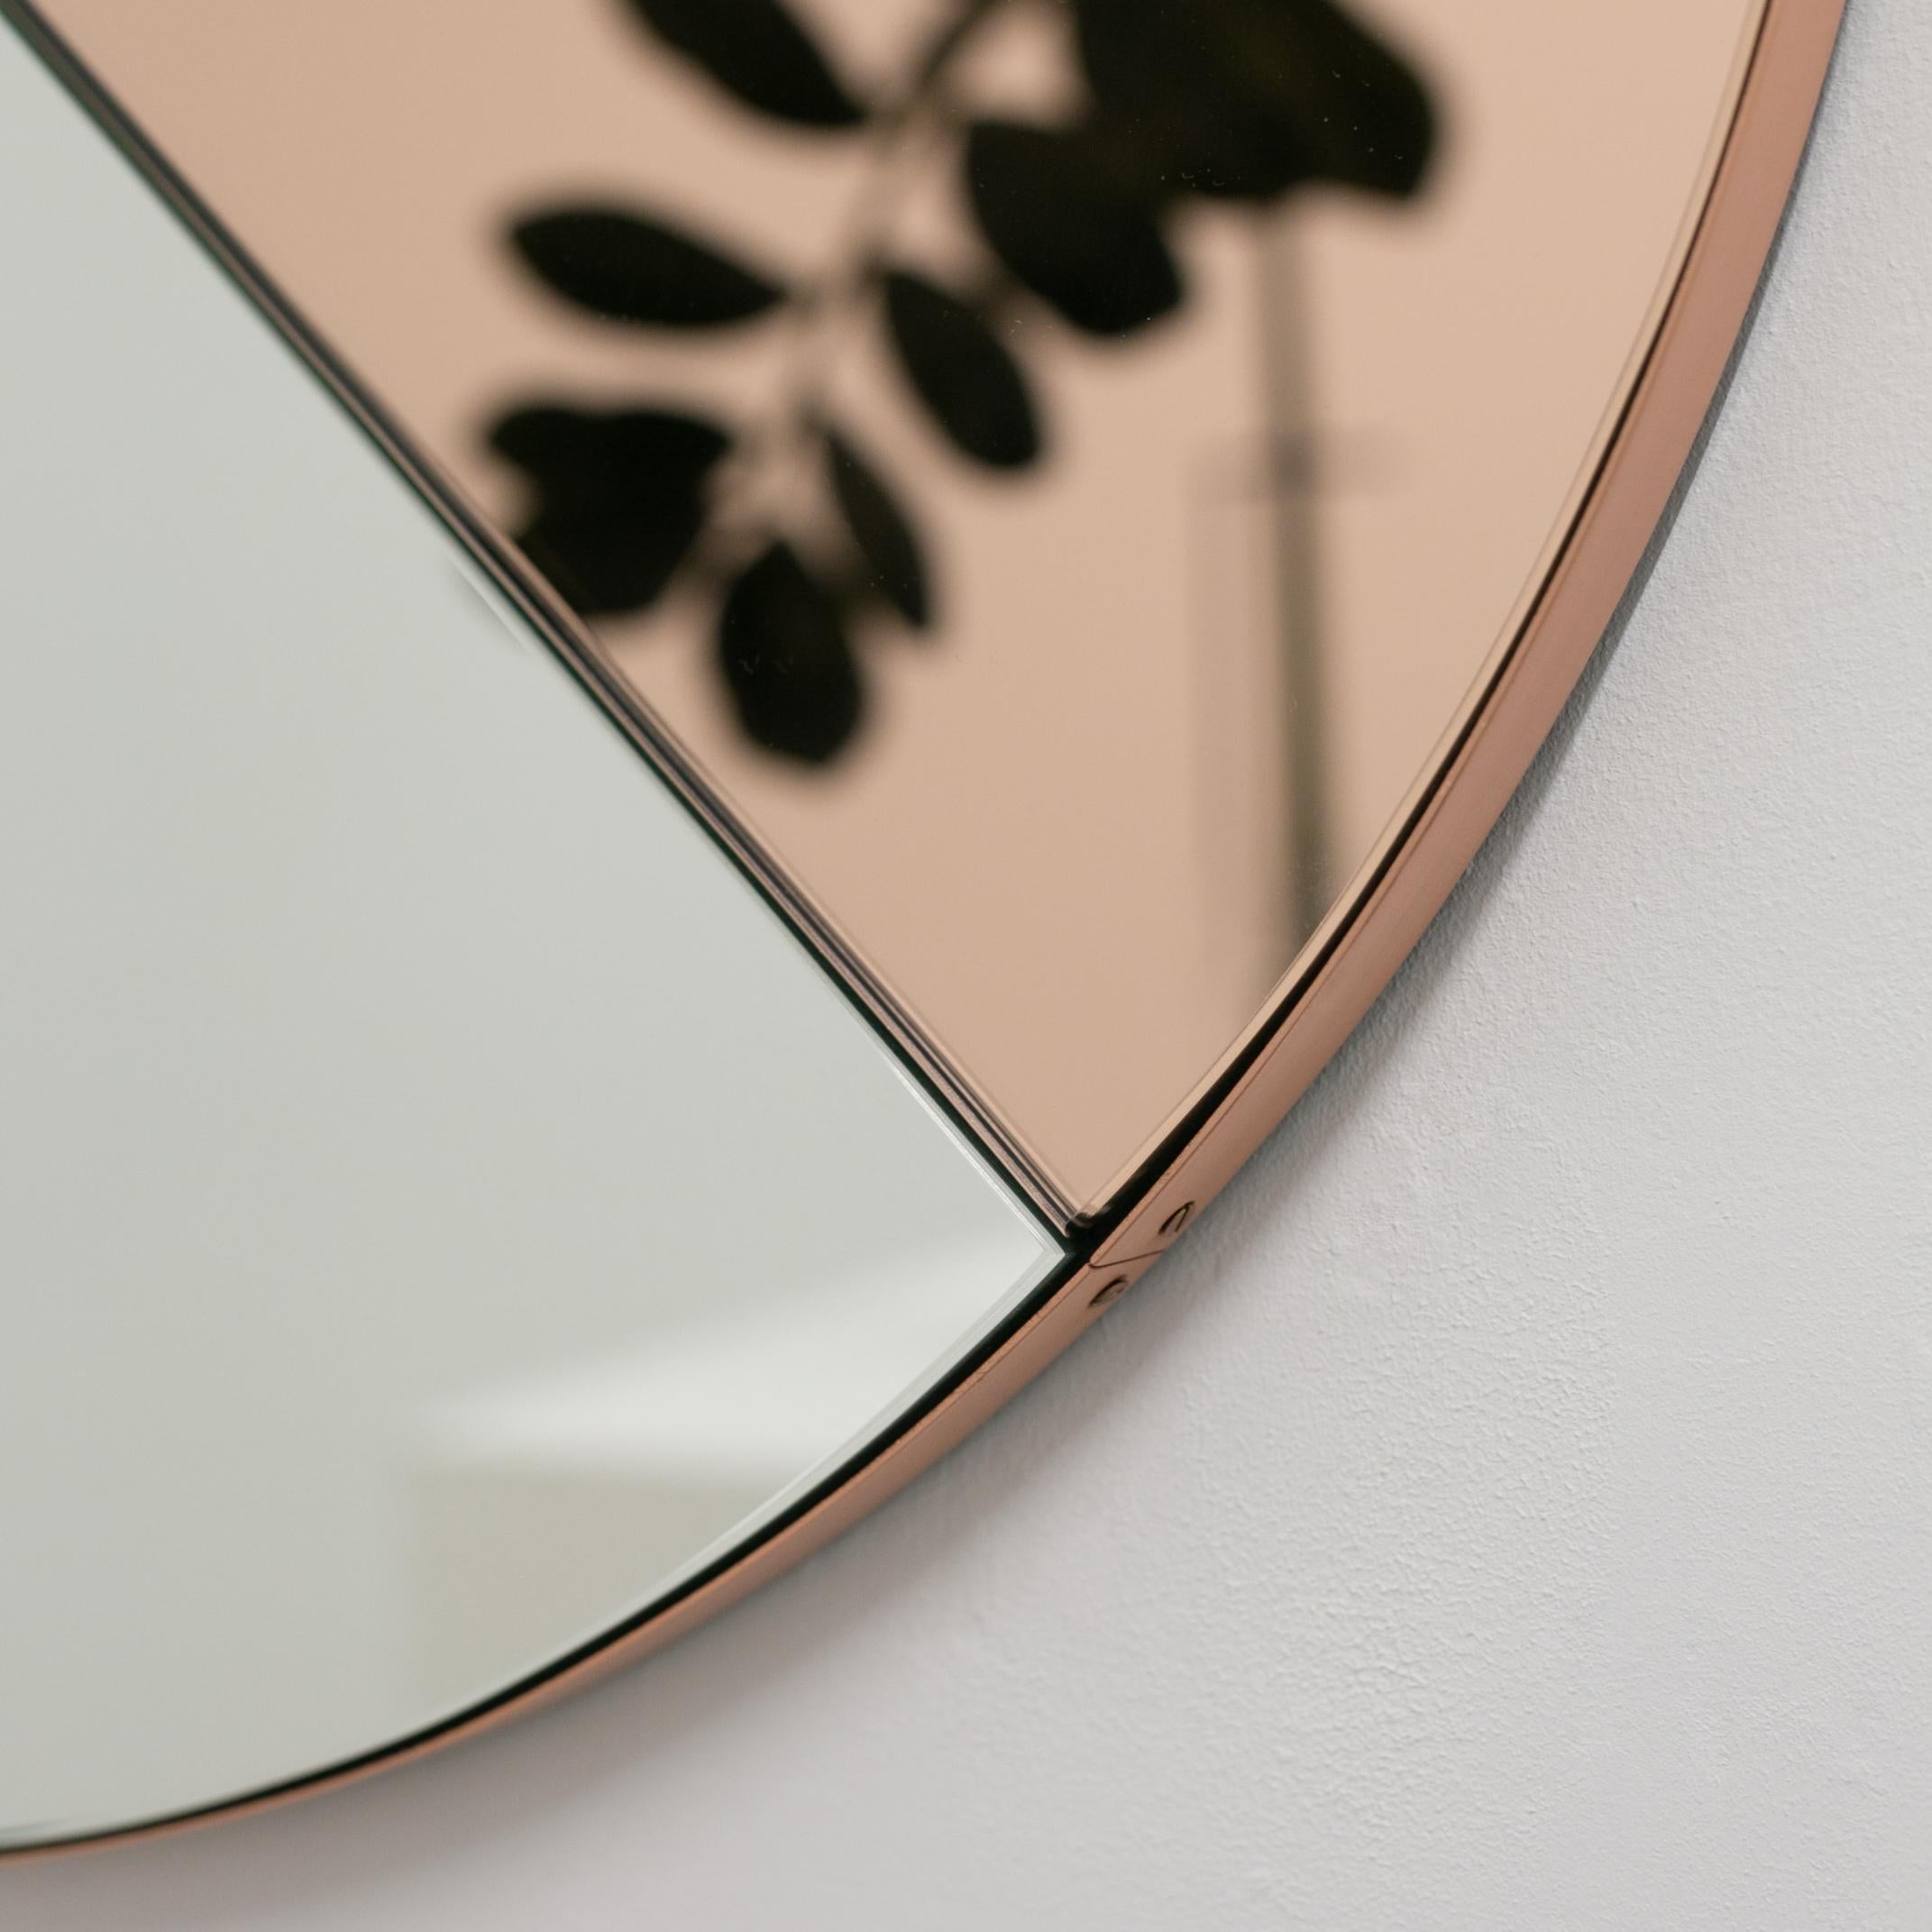 Brushed In Stock Orbis Dualis Peach Silver Round Mirror with Copper Frame, Medium For Sale